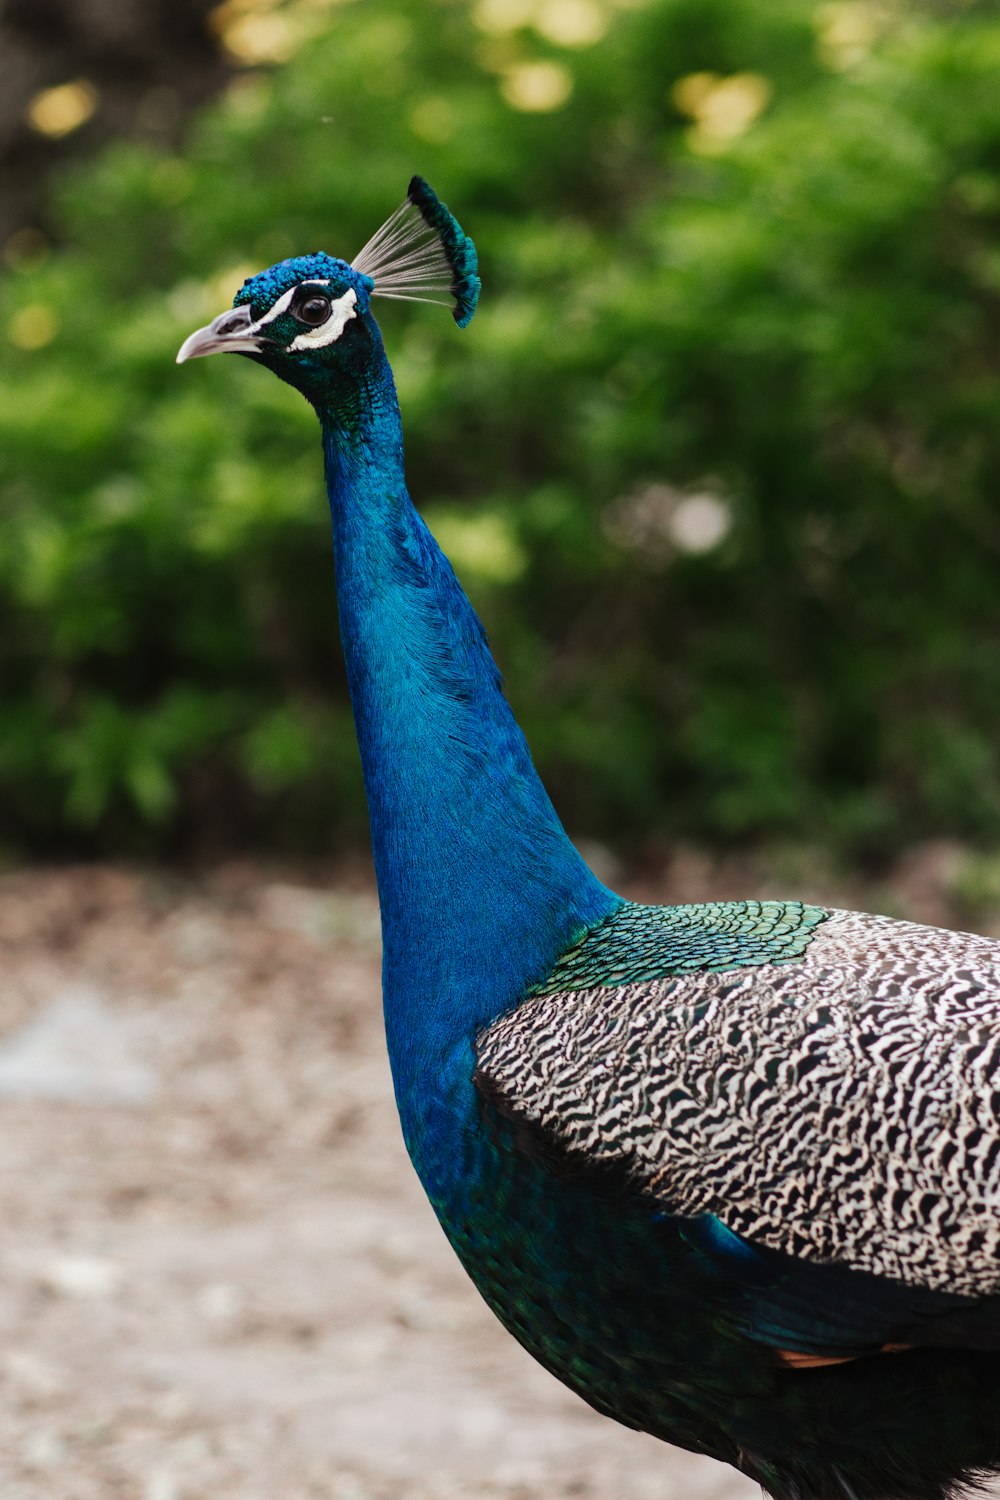 a blue and black bird standing on a dirt road